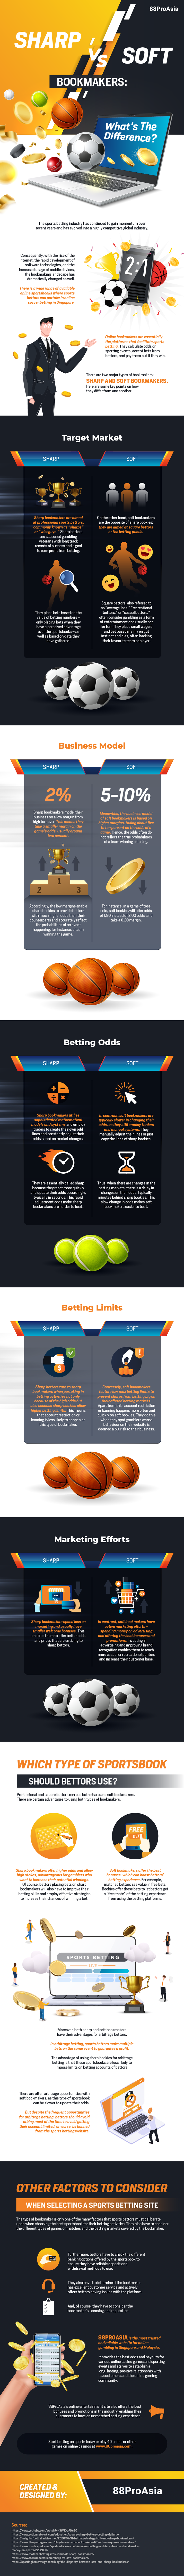 Sharp vs Soft Bookmakers: What’s The Difference?